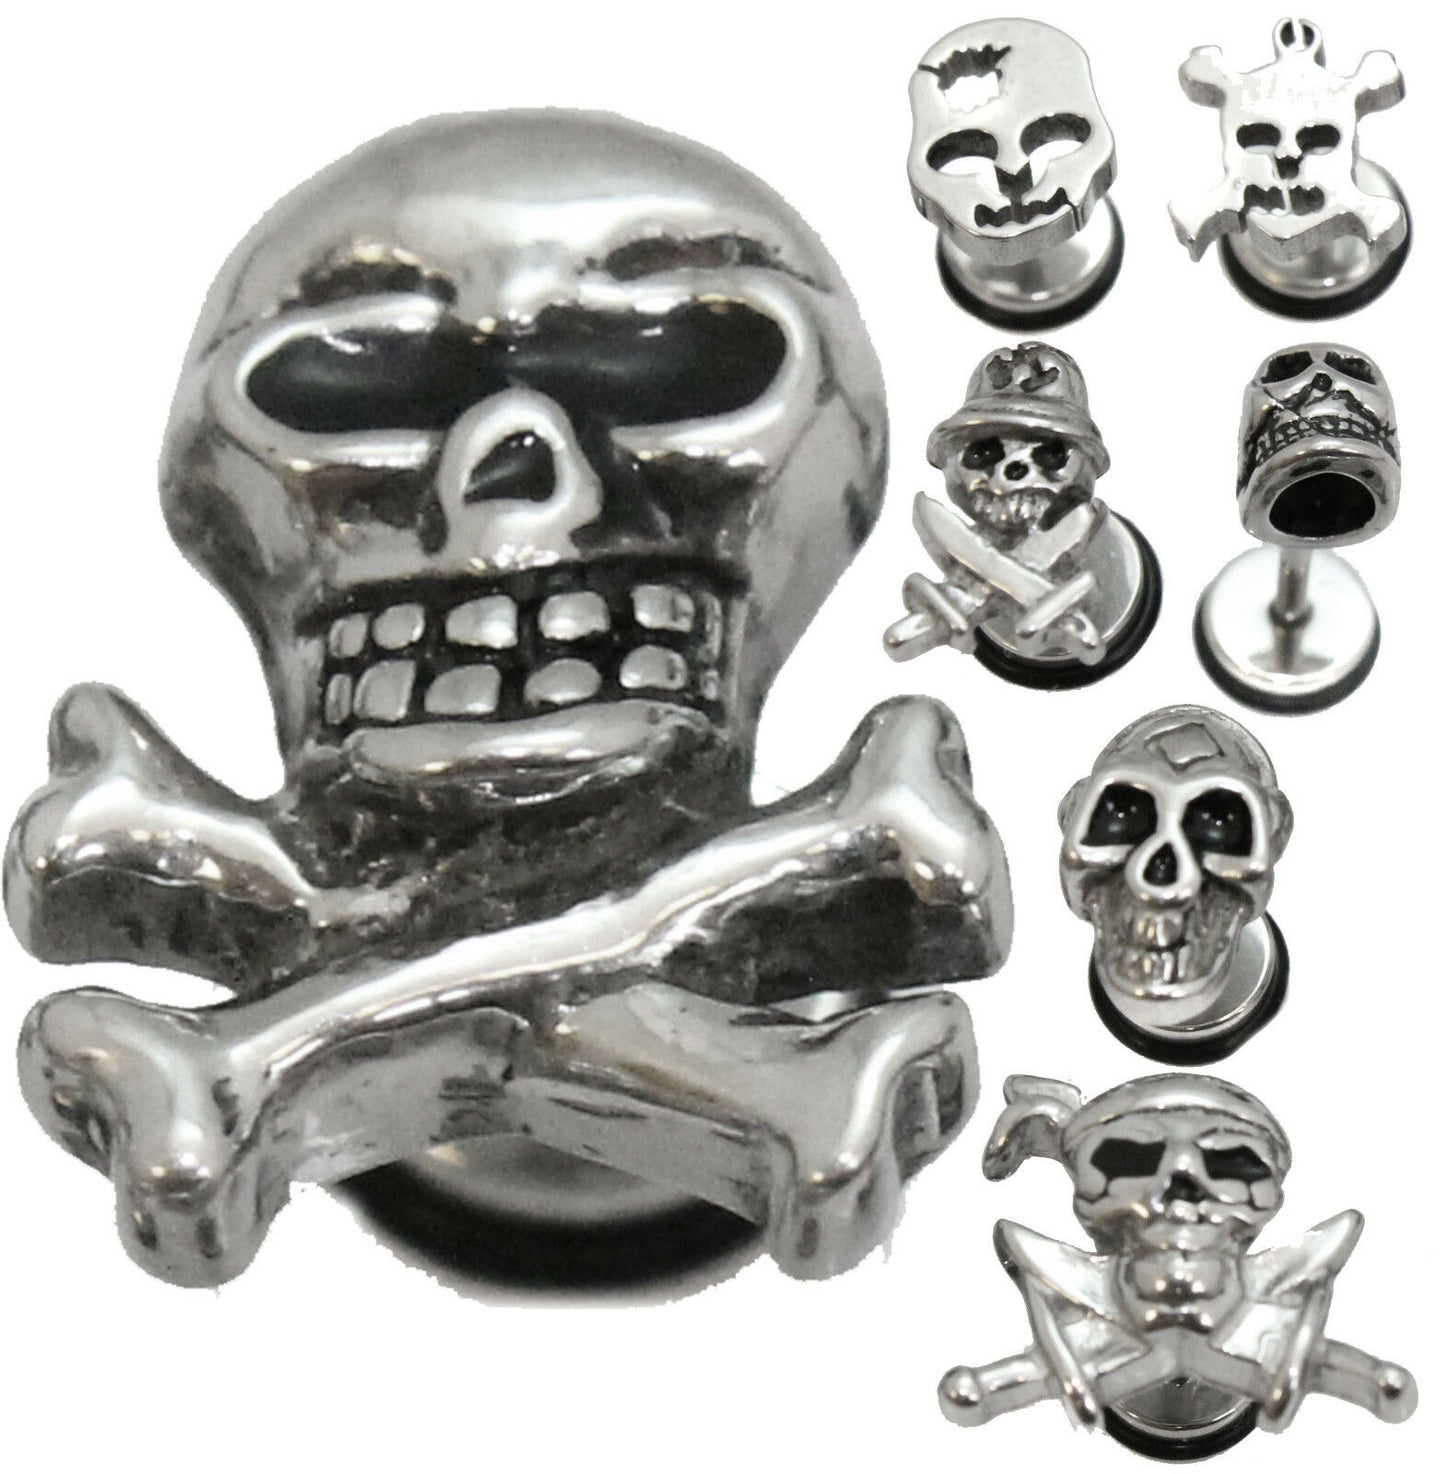 1 Skull Earring Surgical Stainless Steel Stud Body Jewelry Mens Silver Tone Gift